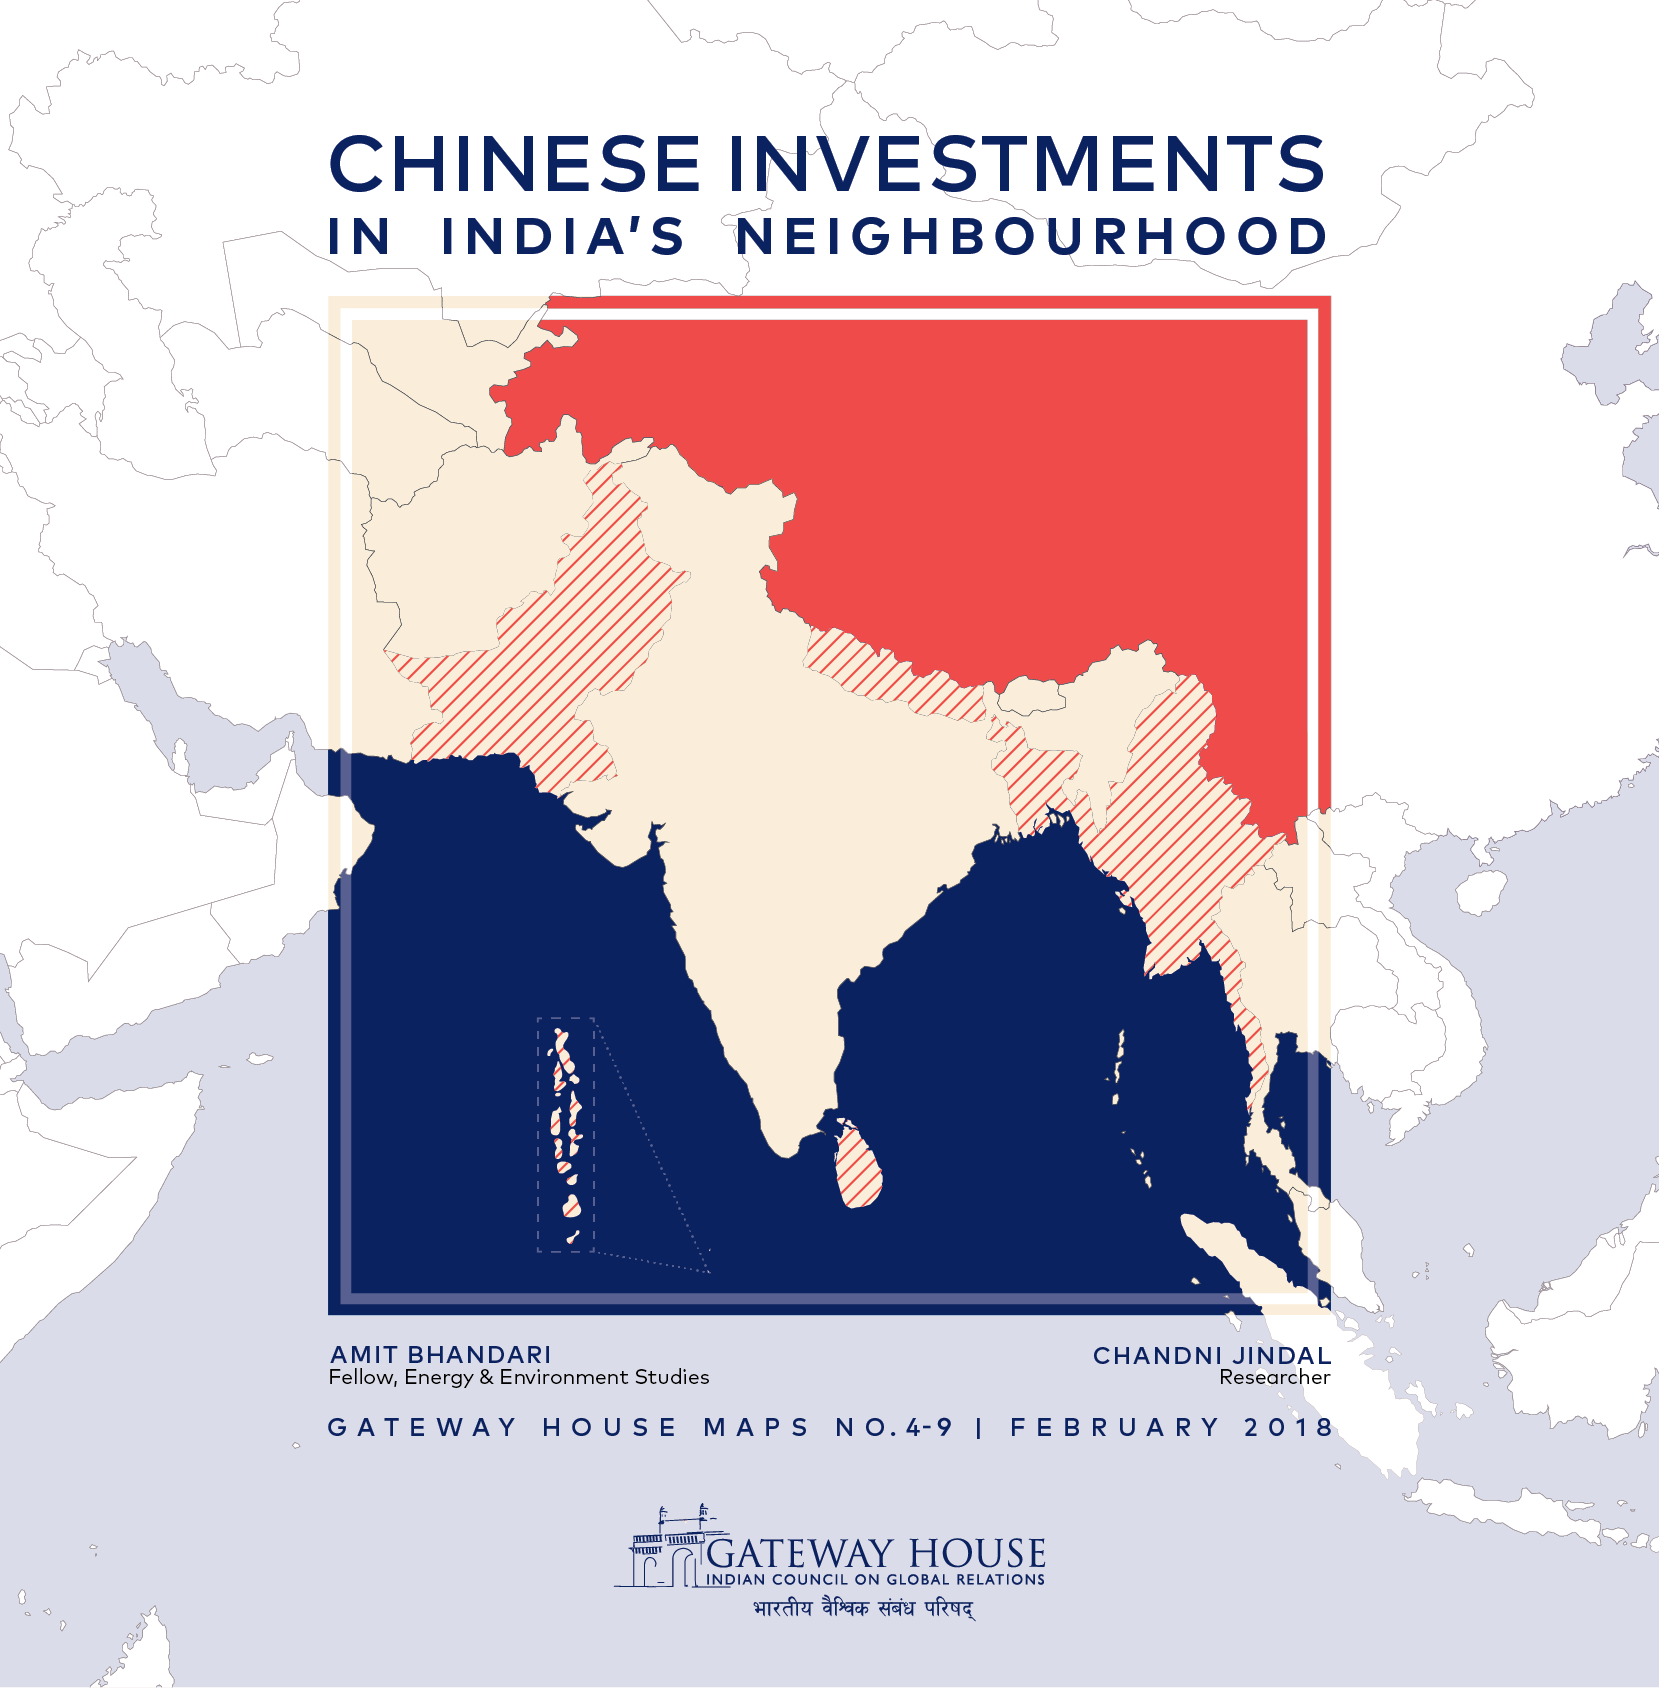 Gateway House's research on Chinese investments in India's Neighbourhood. Researched by Amit Bhandari and Chandni Jindal.